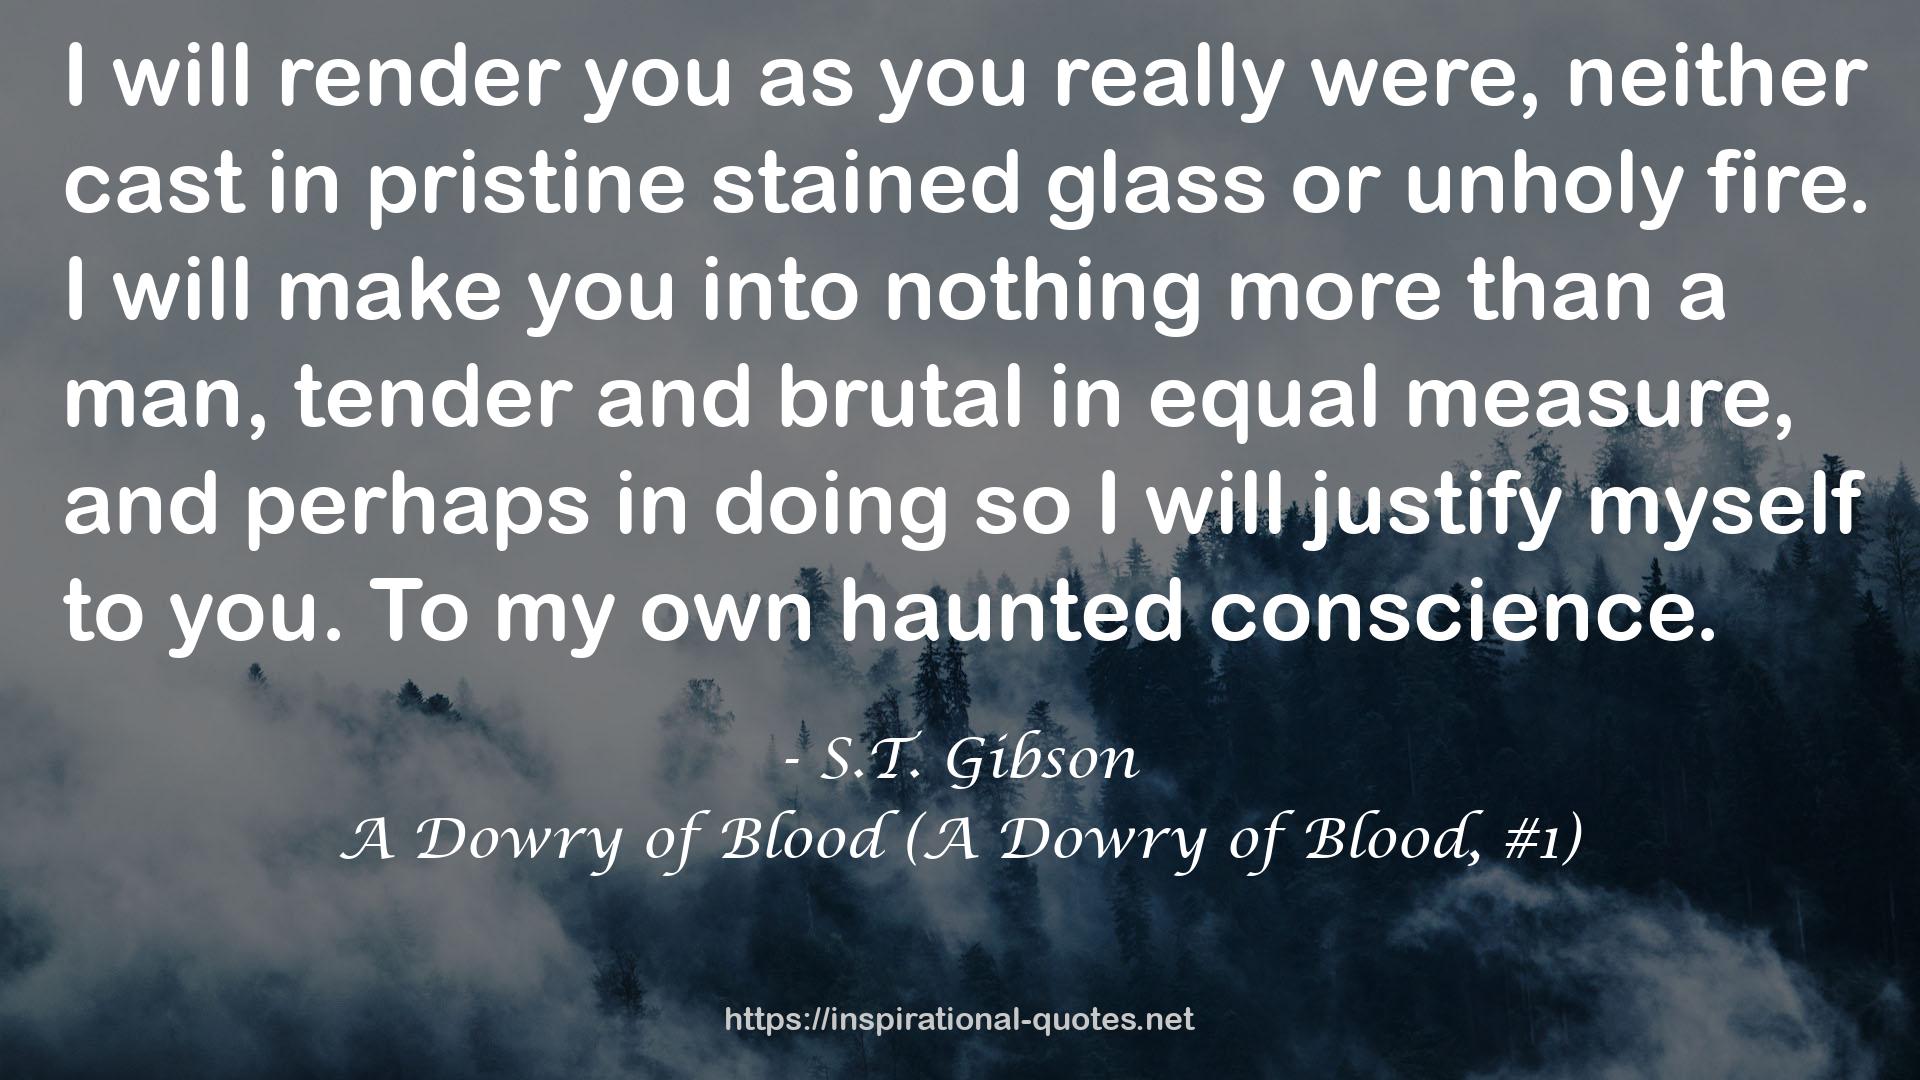 A Dowry of Blood (A Dowry of Blood, #1) QUOTES